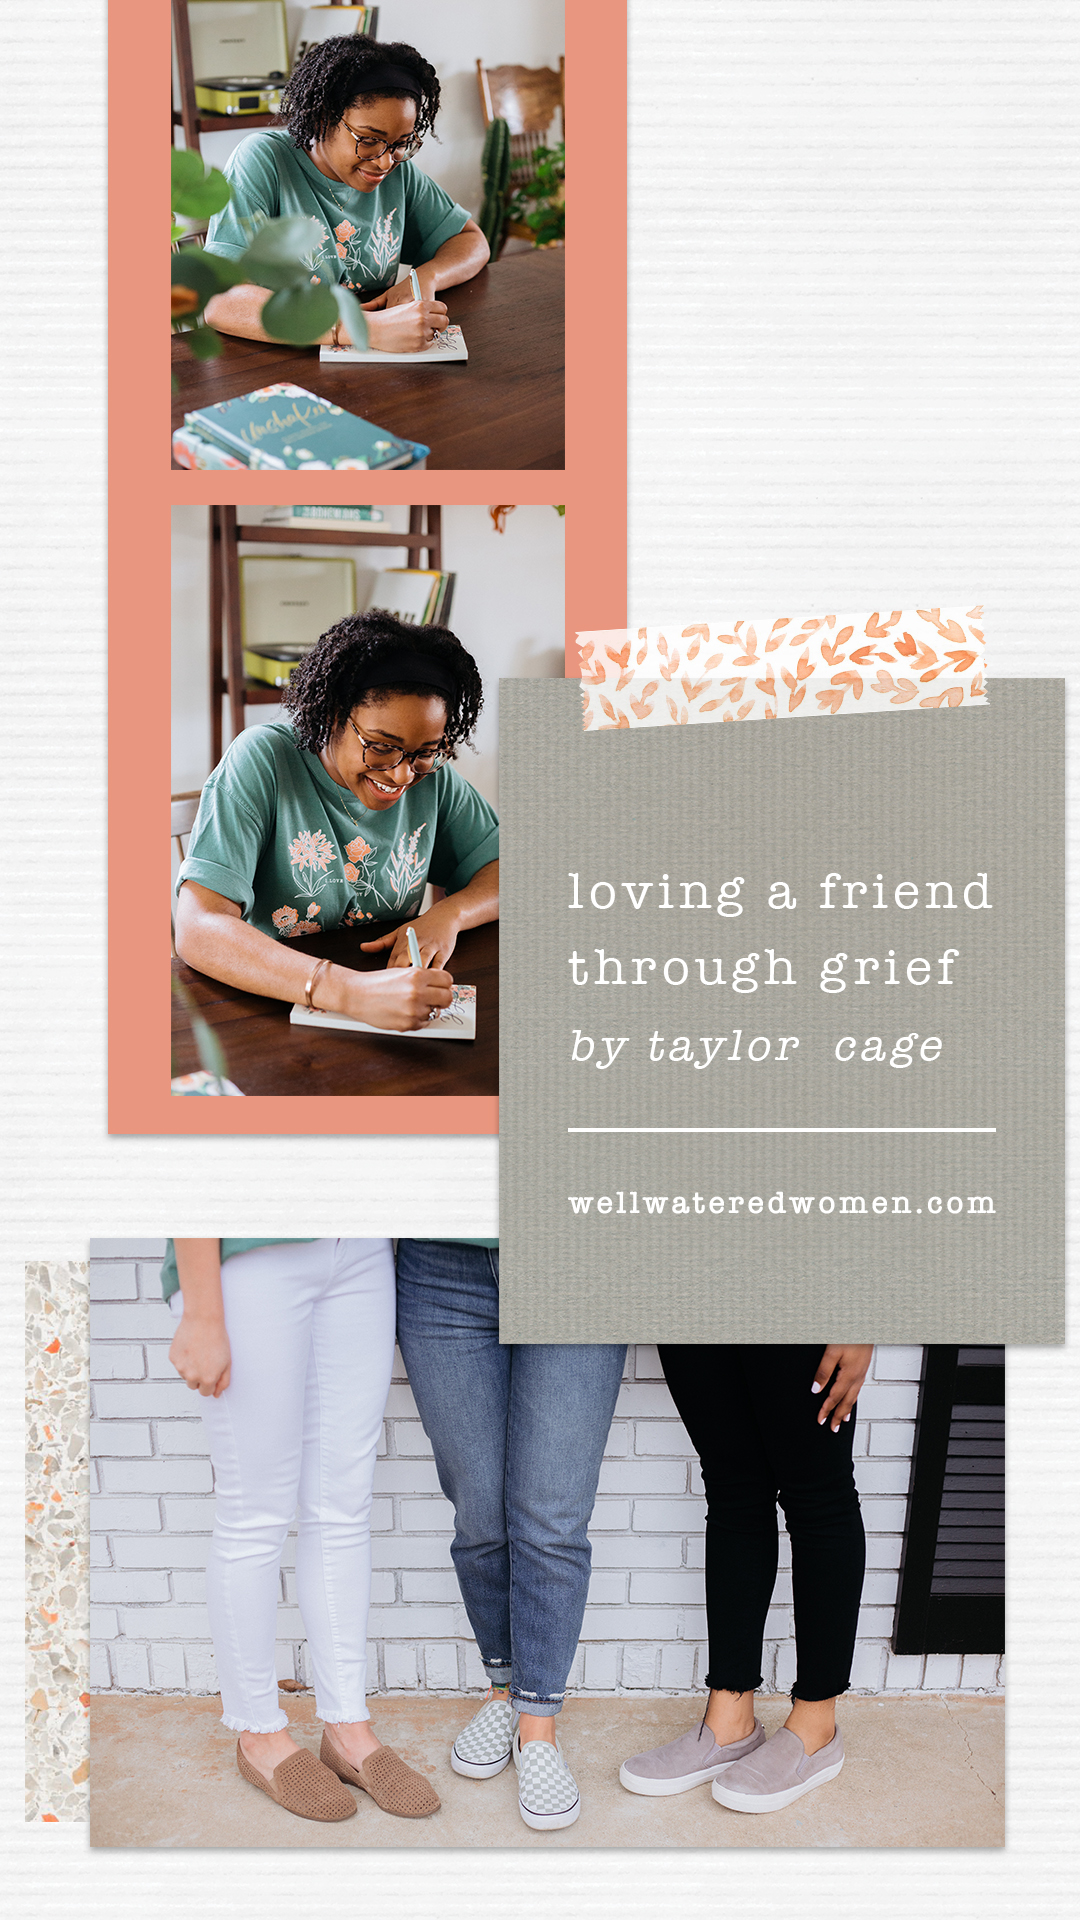 Well-Watered Women Blog | How to Love a Friend Through Grief